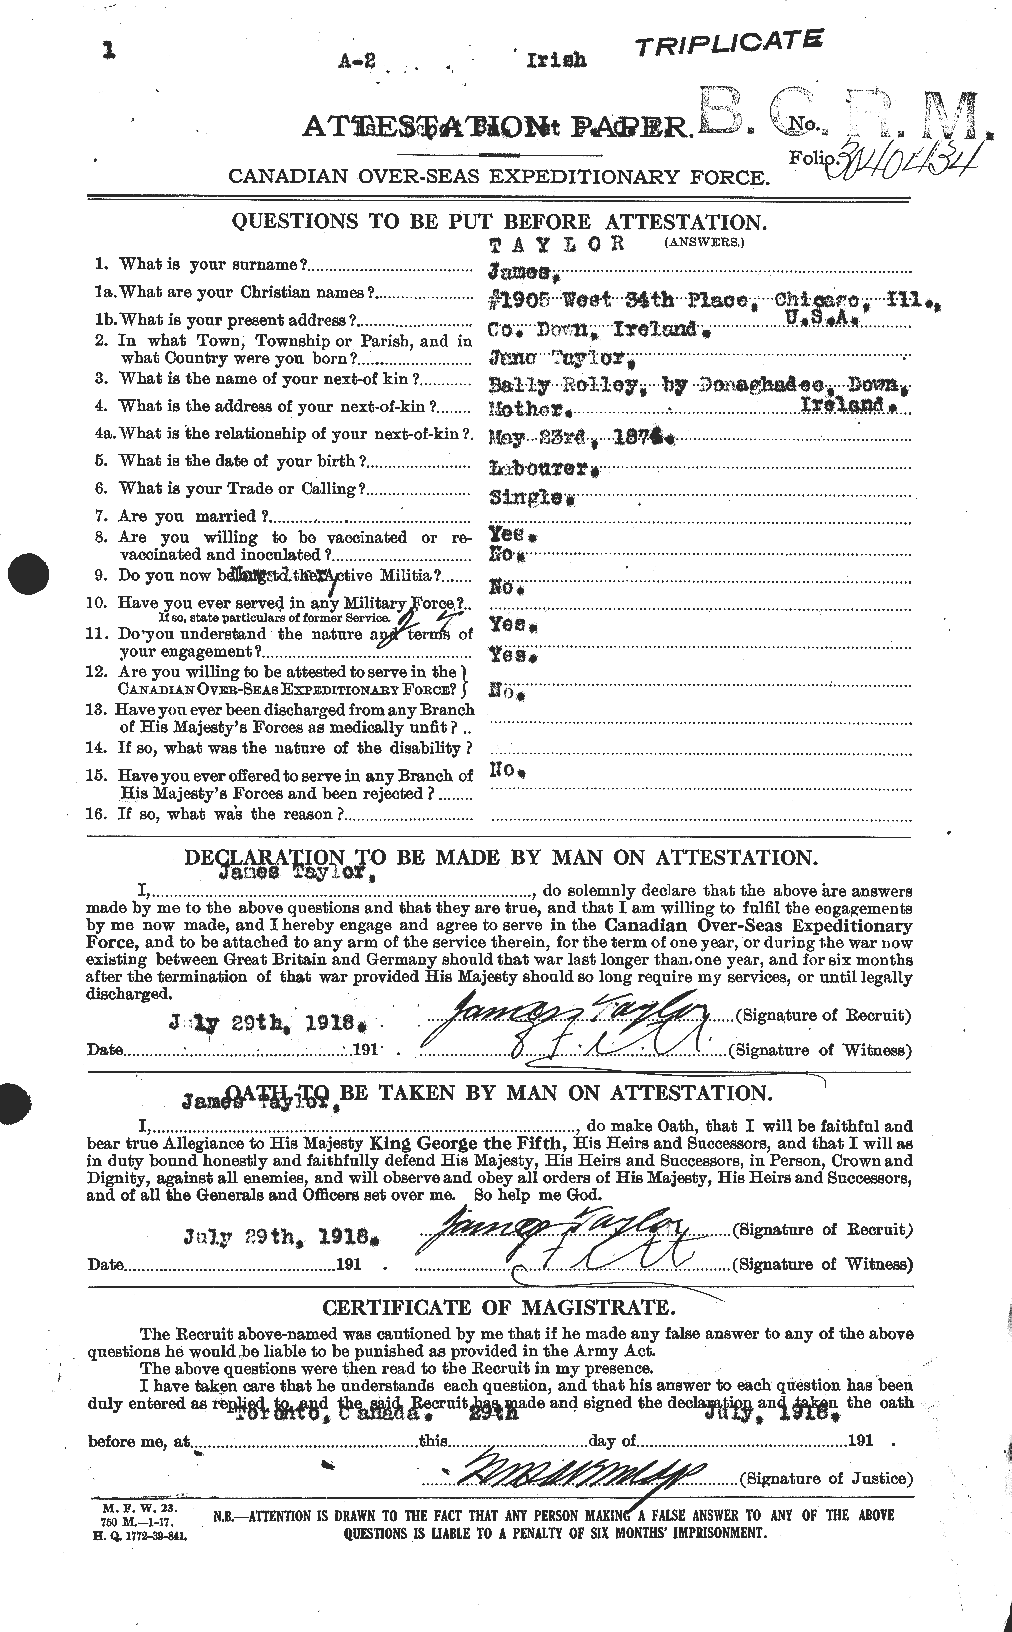 Personnel Records of the First World War - CEF 626675a